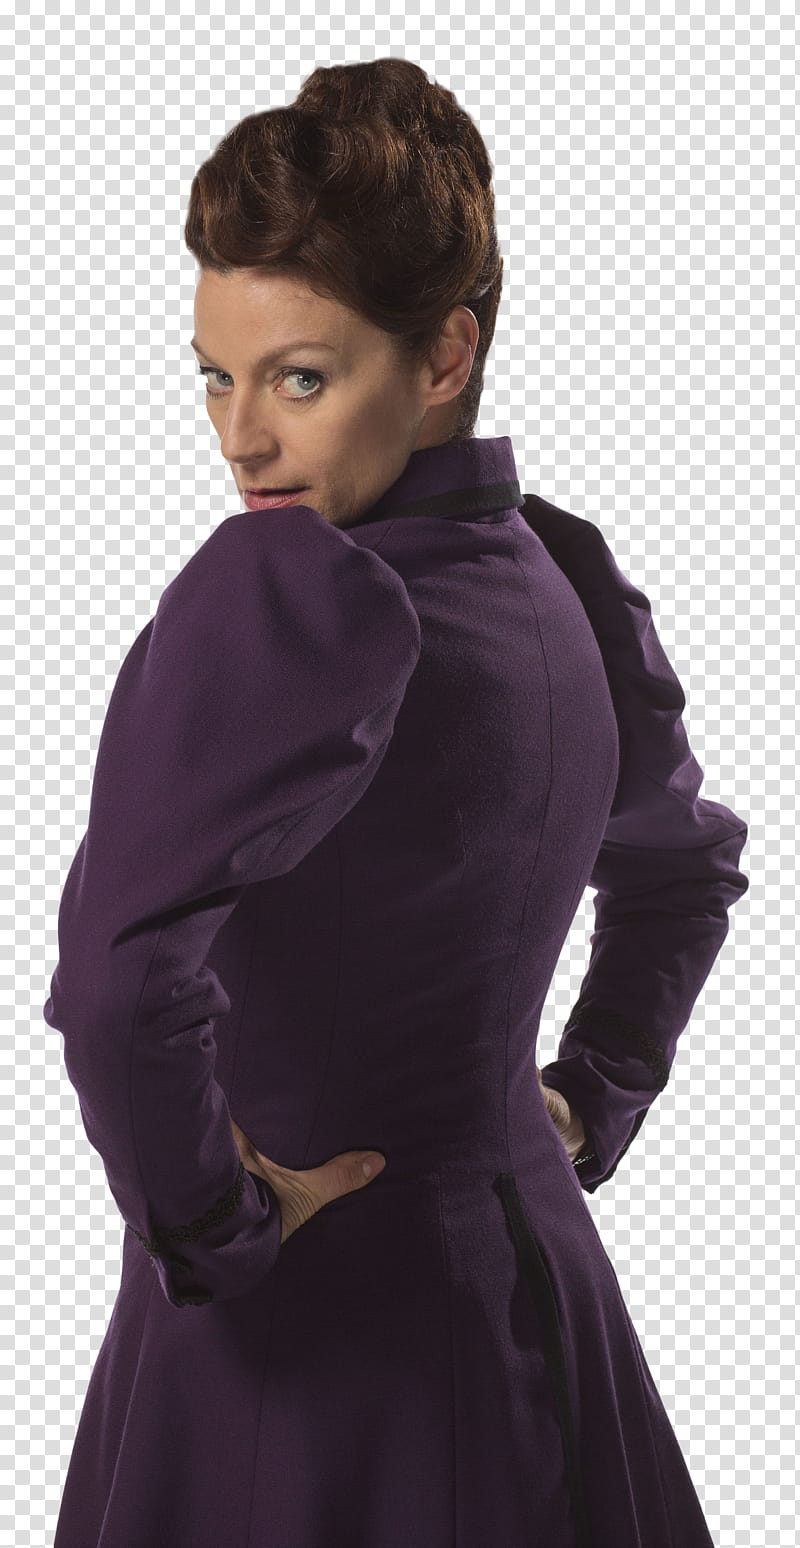 Doctor Who Season , woman in purple long-sleeved dress posing for transparent background PNG clipart